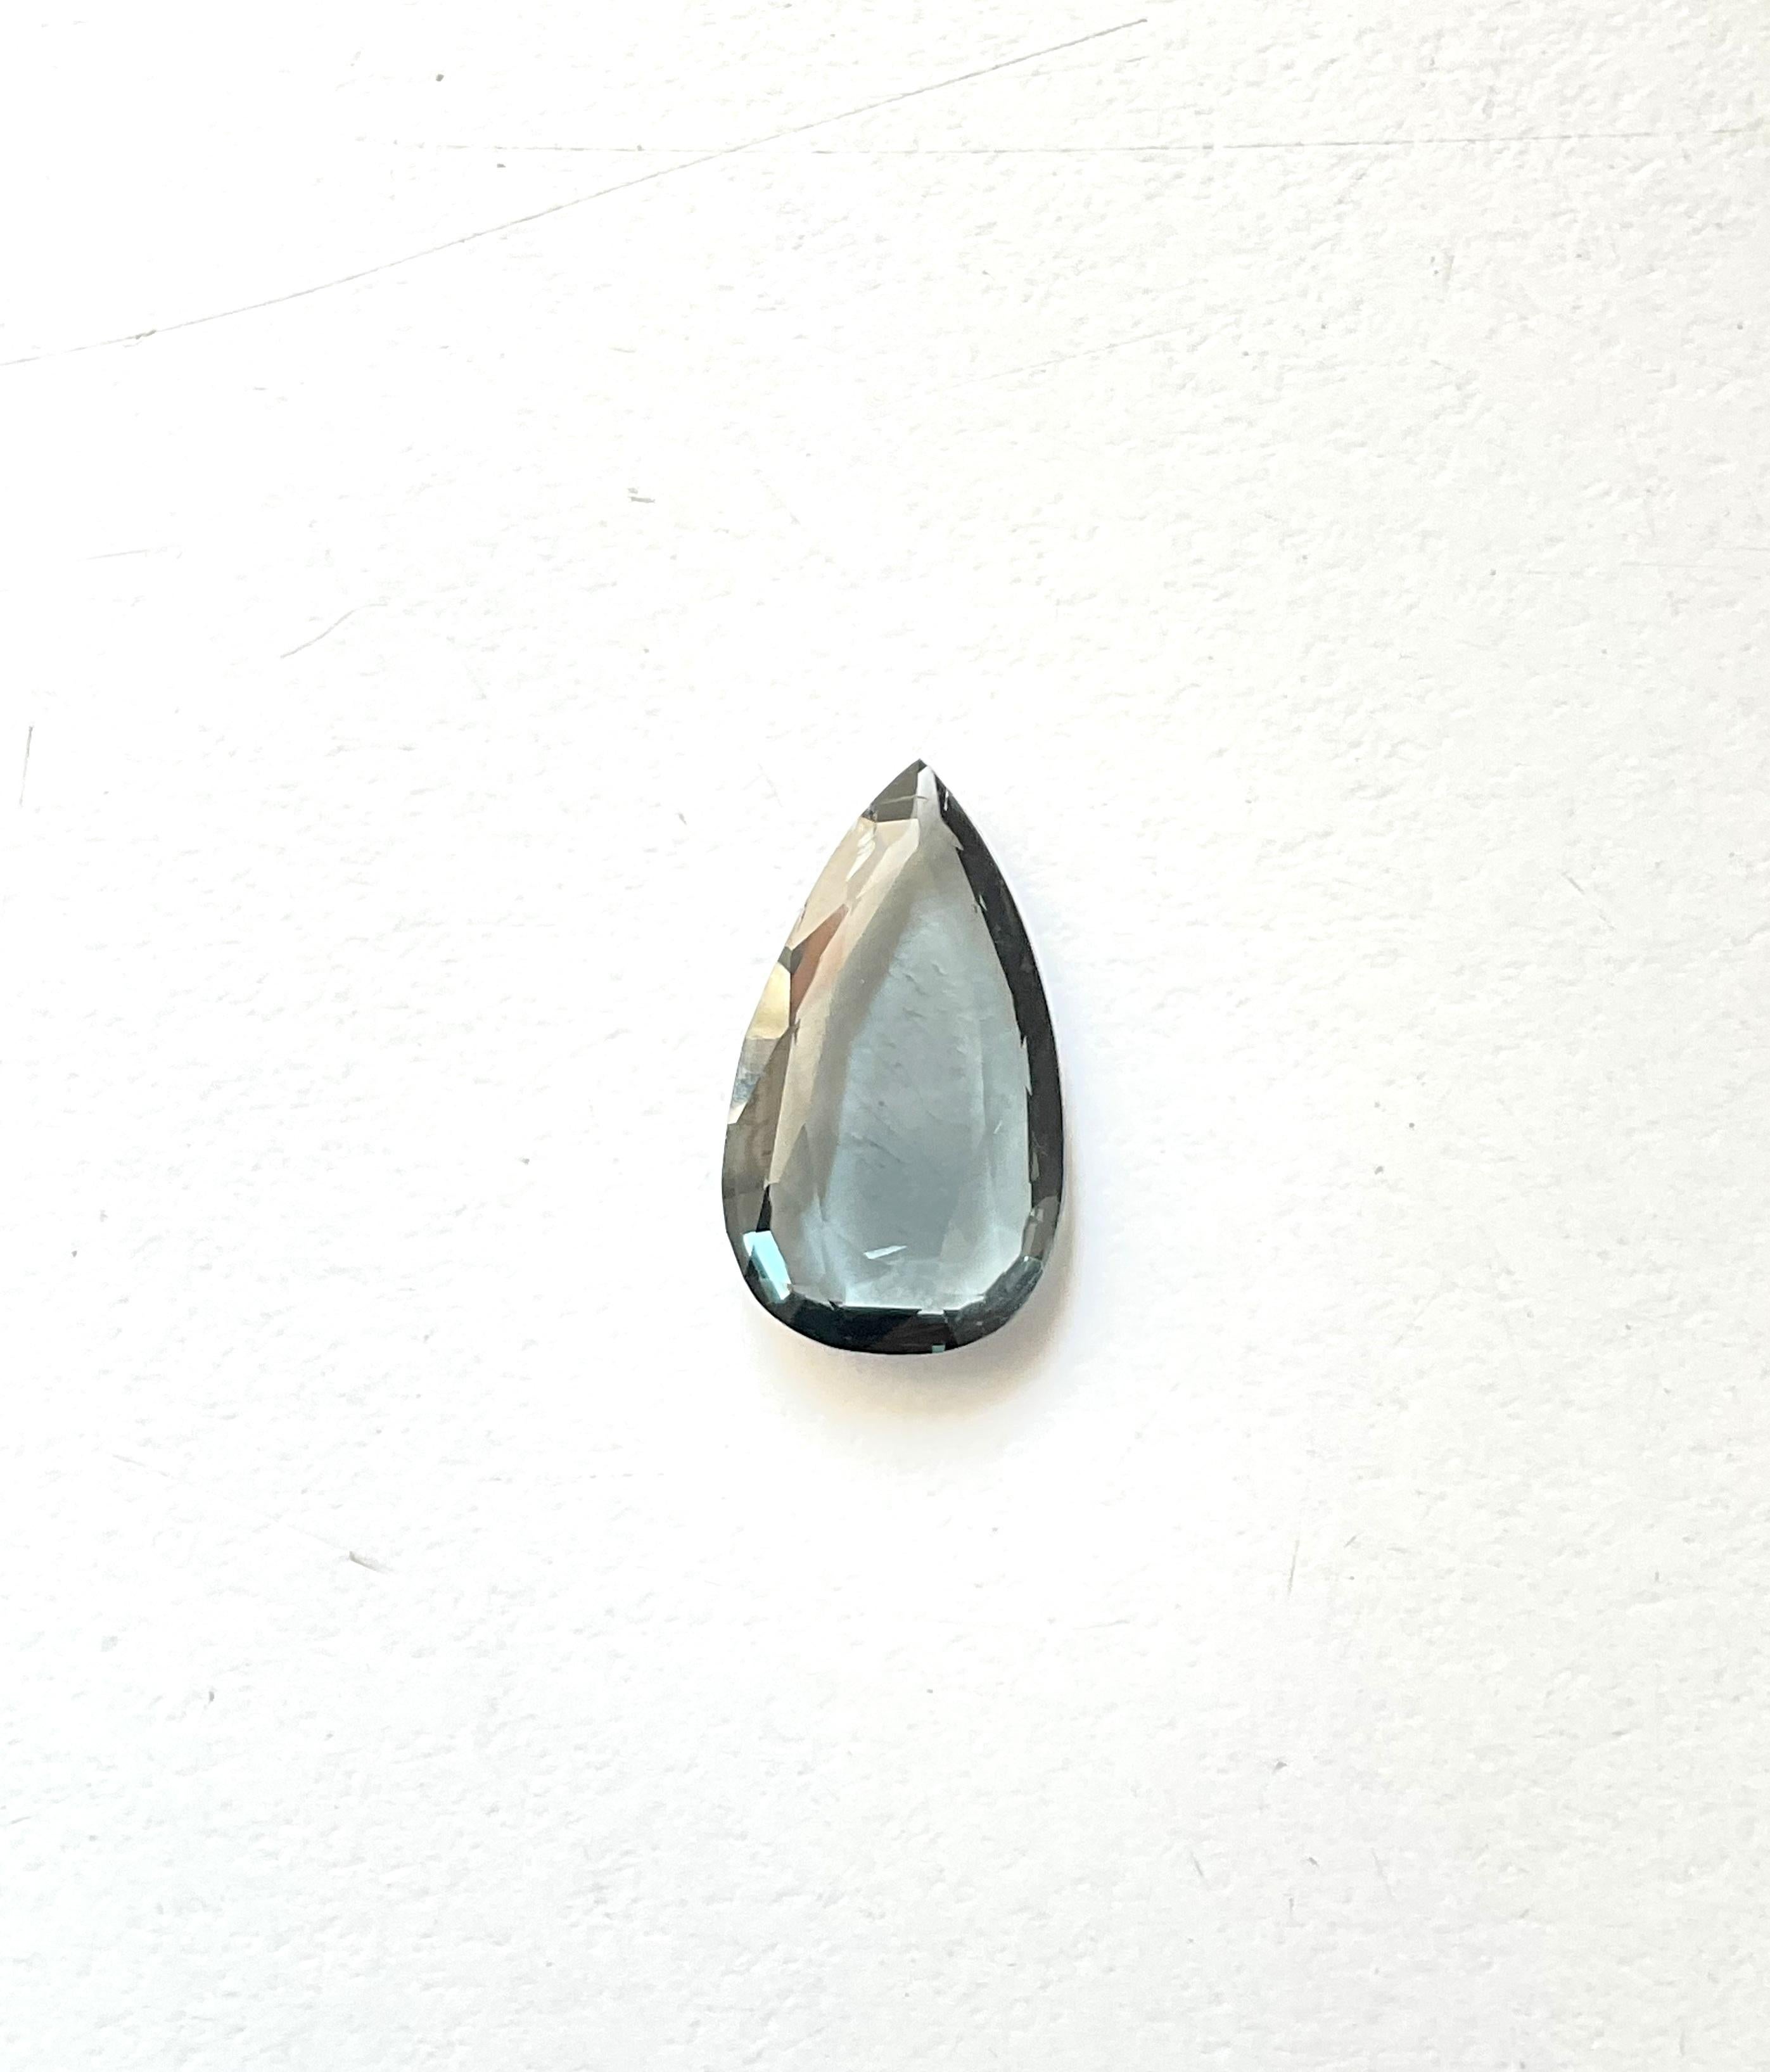 4.39 Carats Grey Burmese Spinel Pear Rose Cut Stone Natural Gemstones For Sale 1